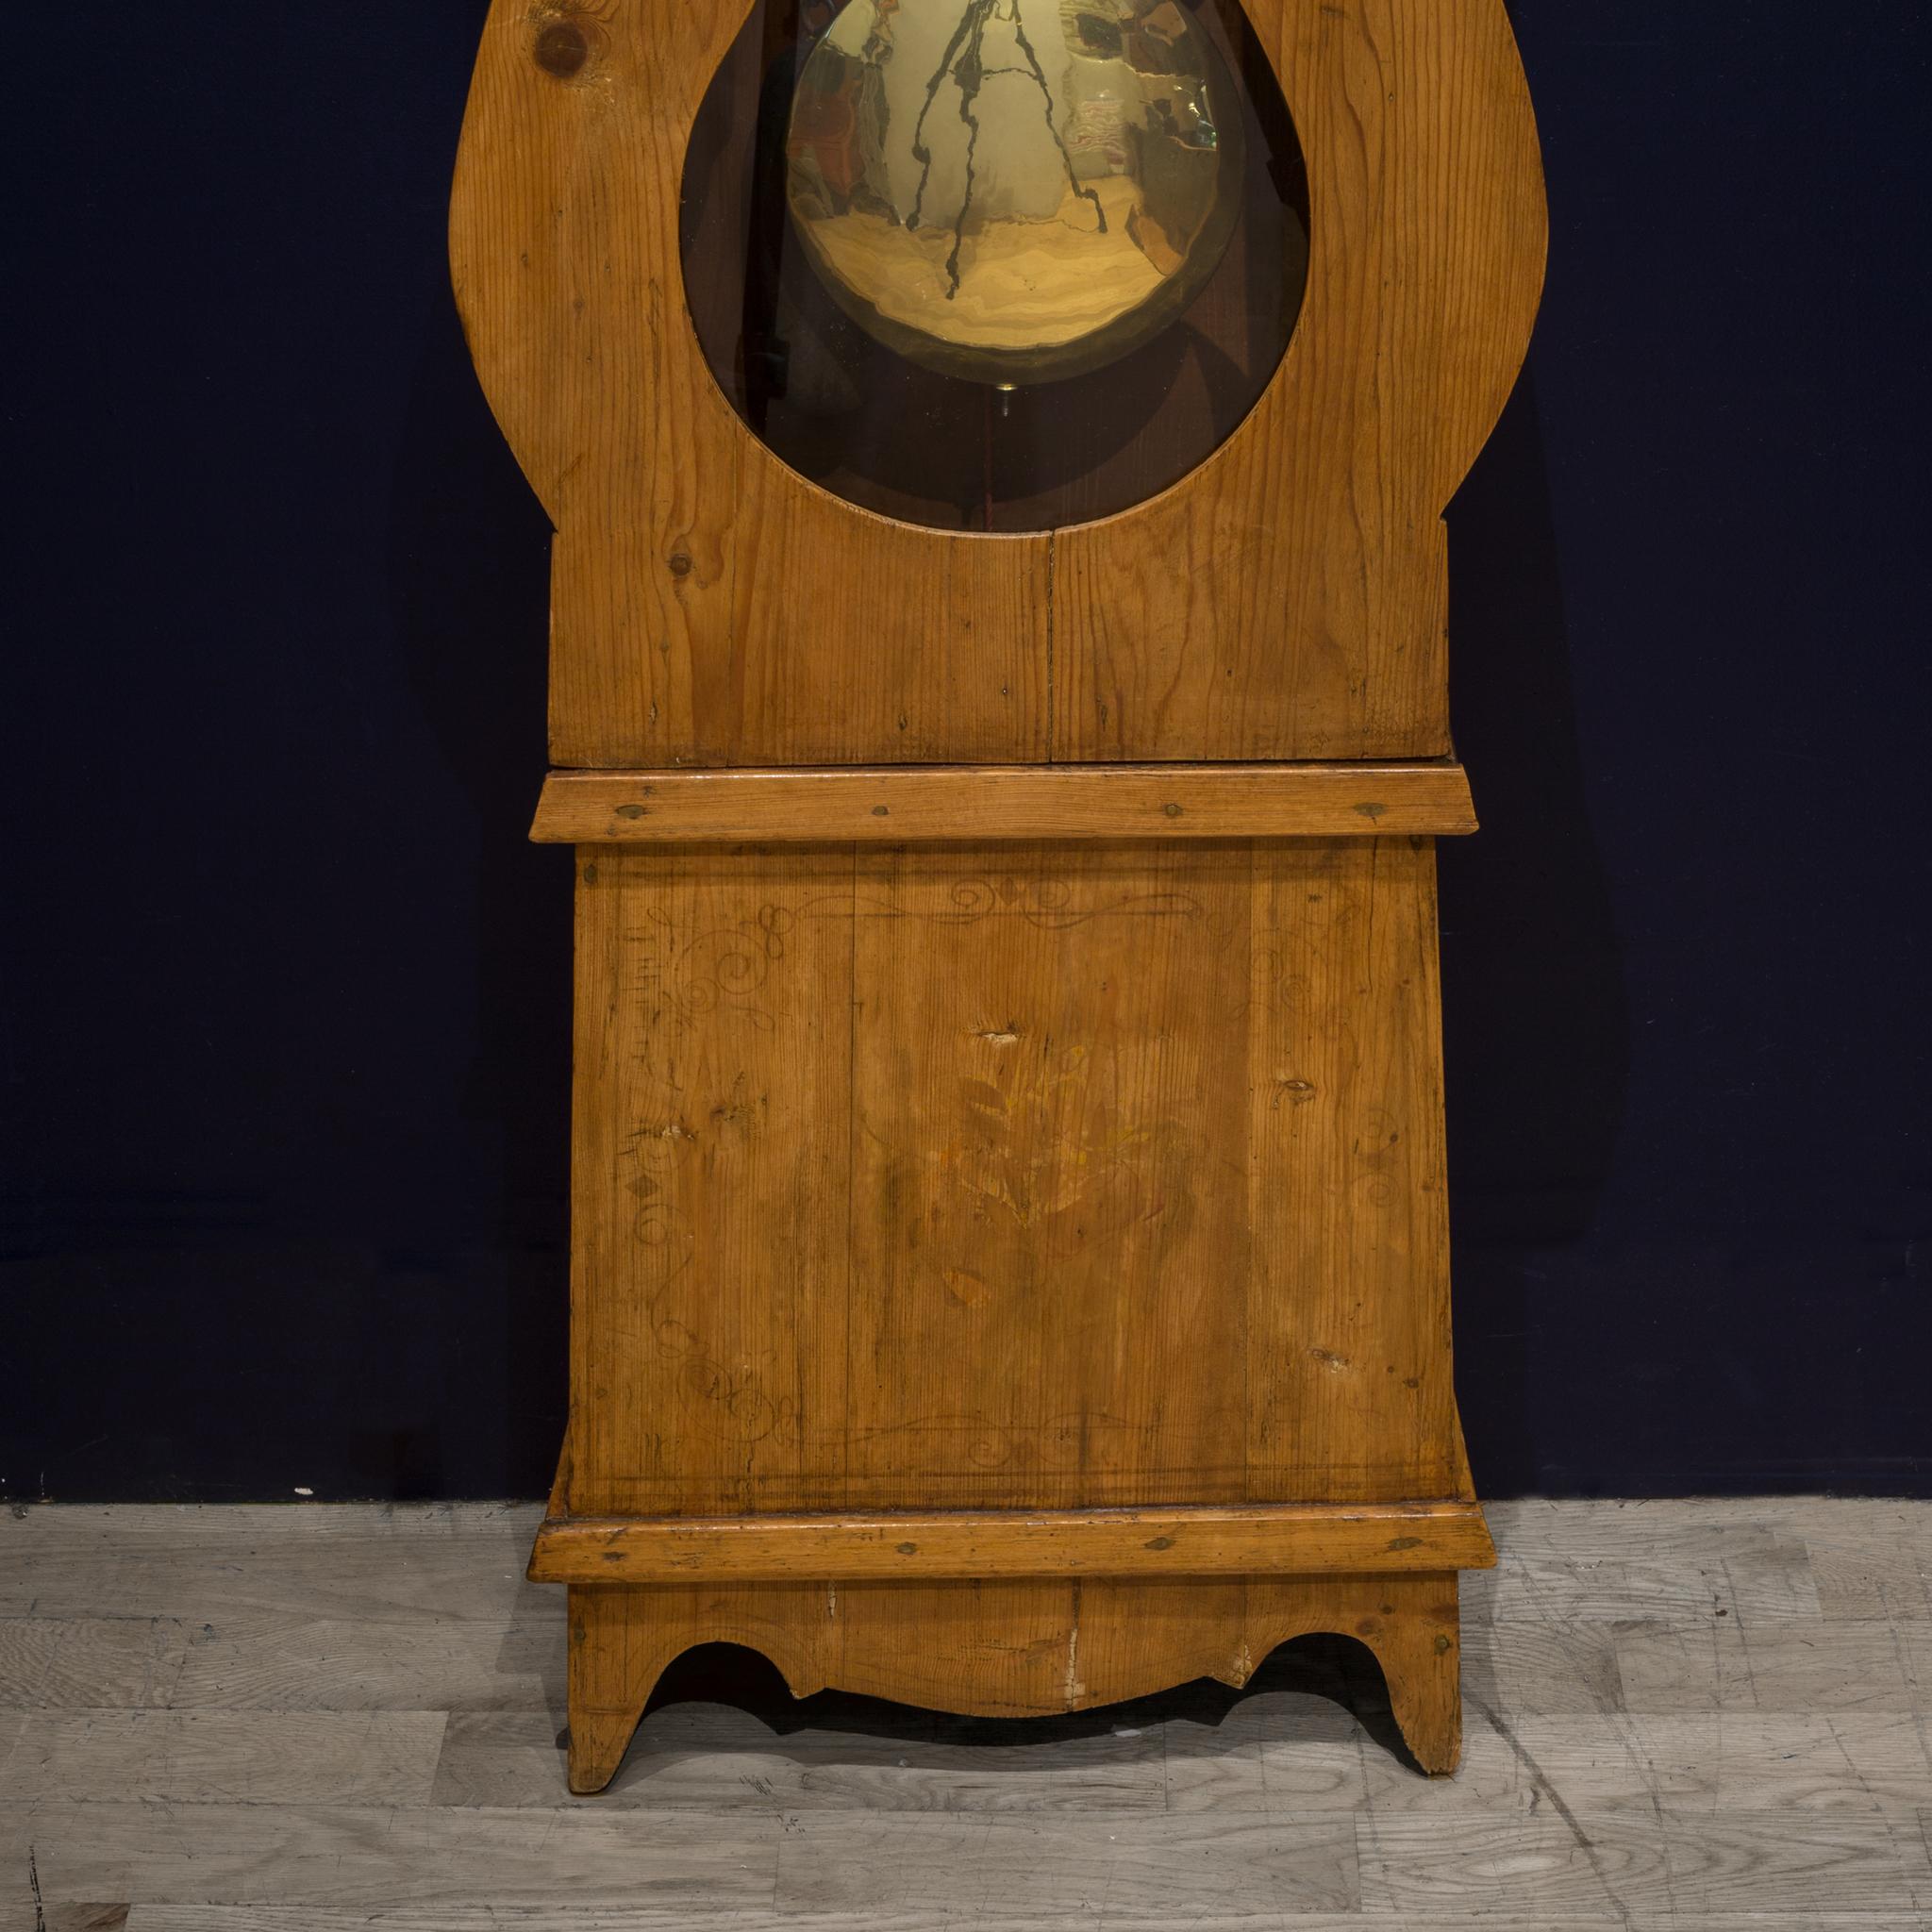 French Provincial Early 19th Century Mobier Longcase Clock, circa 1830-1850